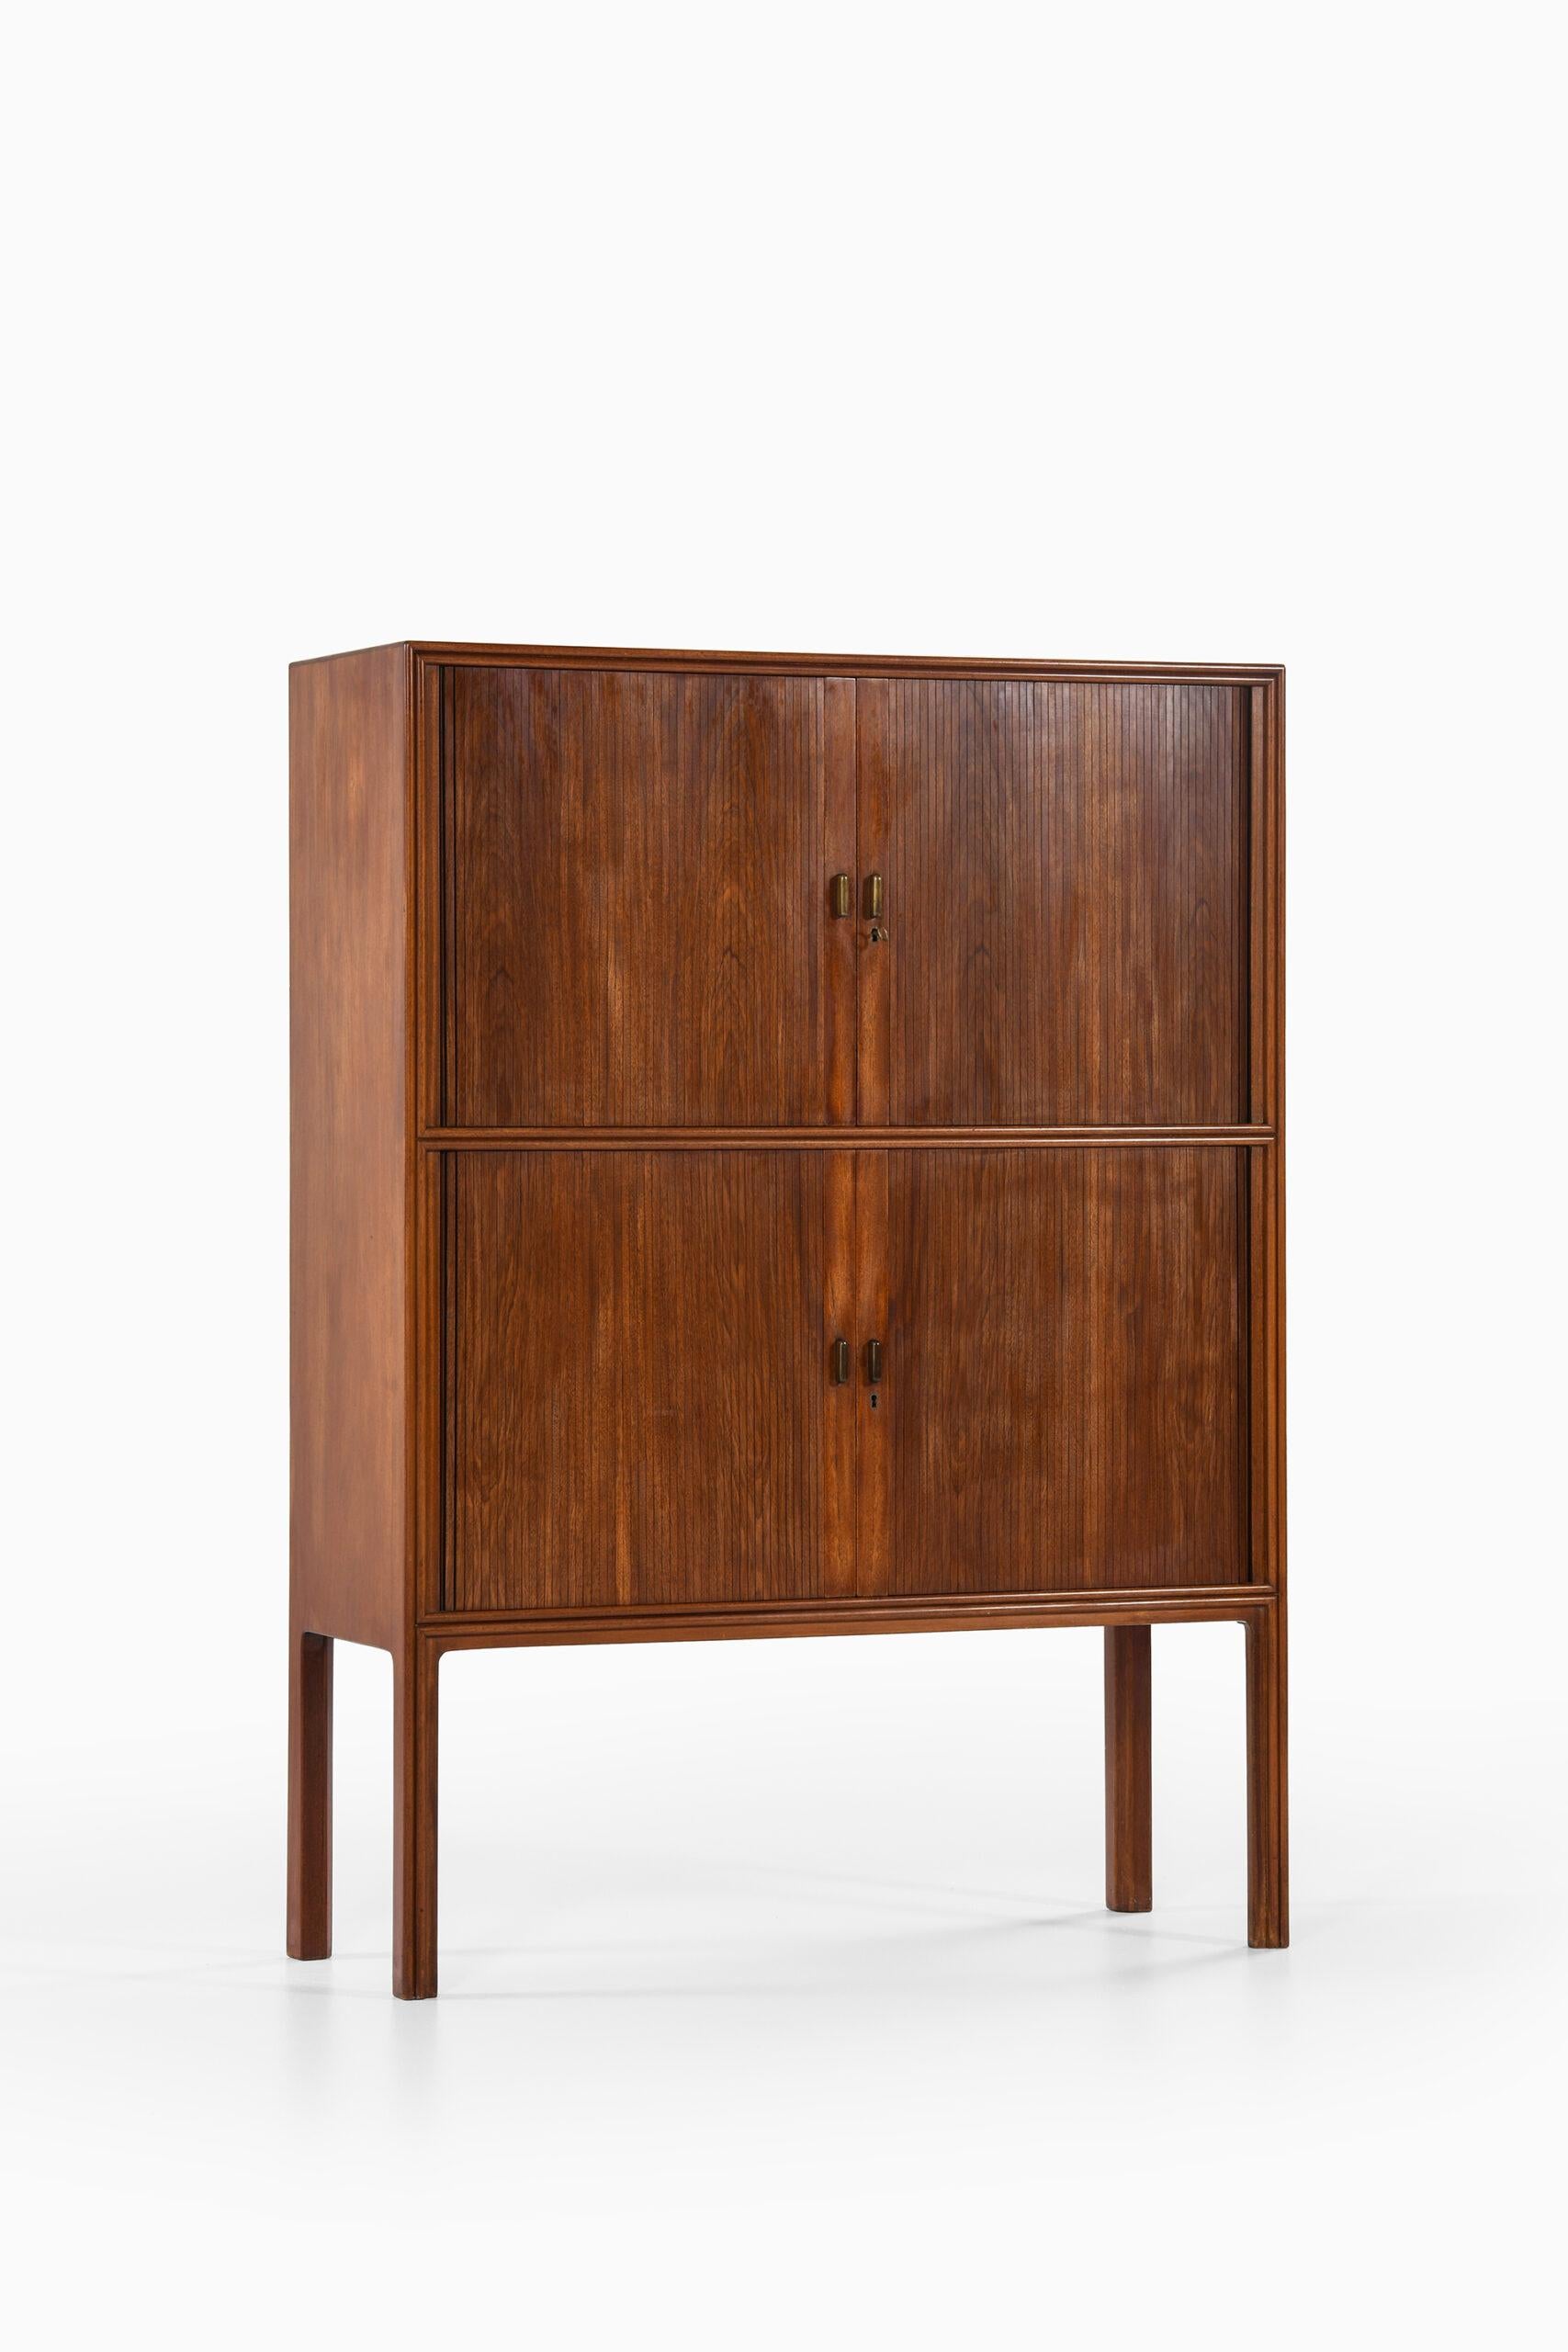 Rare cabinet with tambour doors attributed to Jacob Kjær. Produced by unknown cabinetmaker in Denmark.